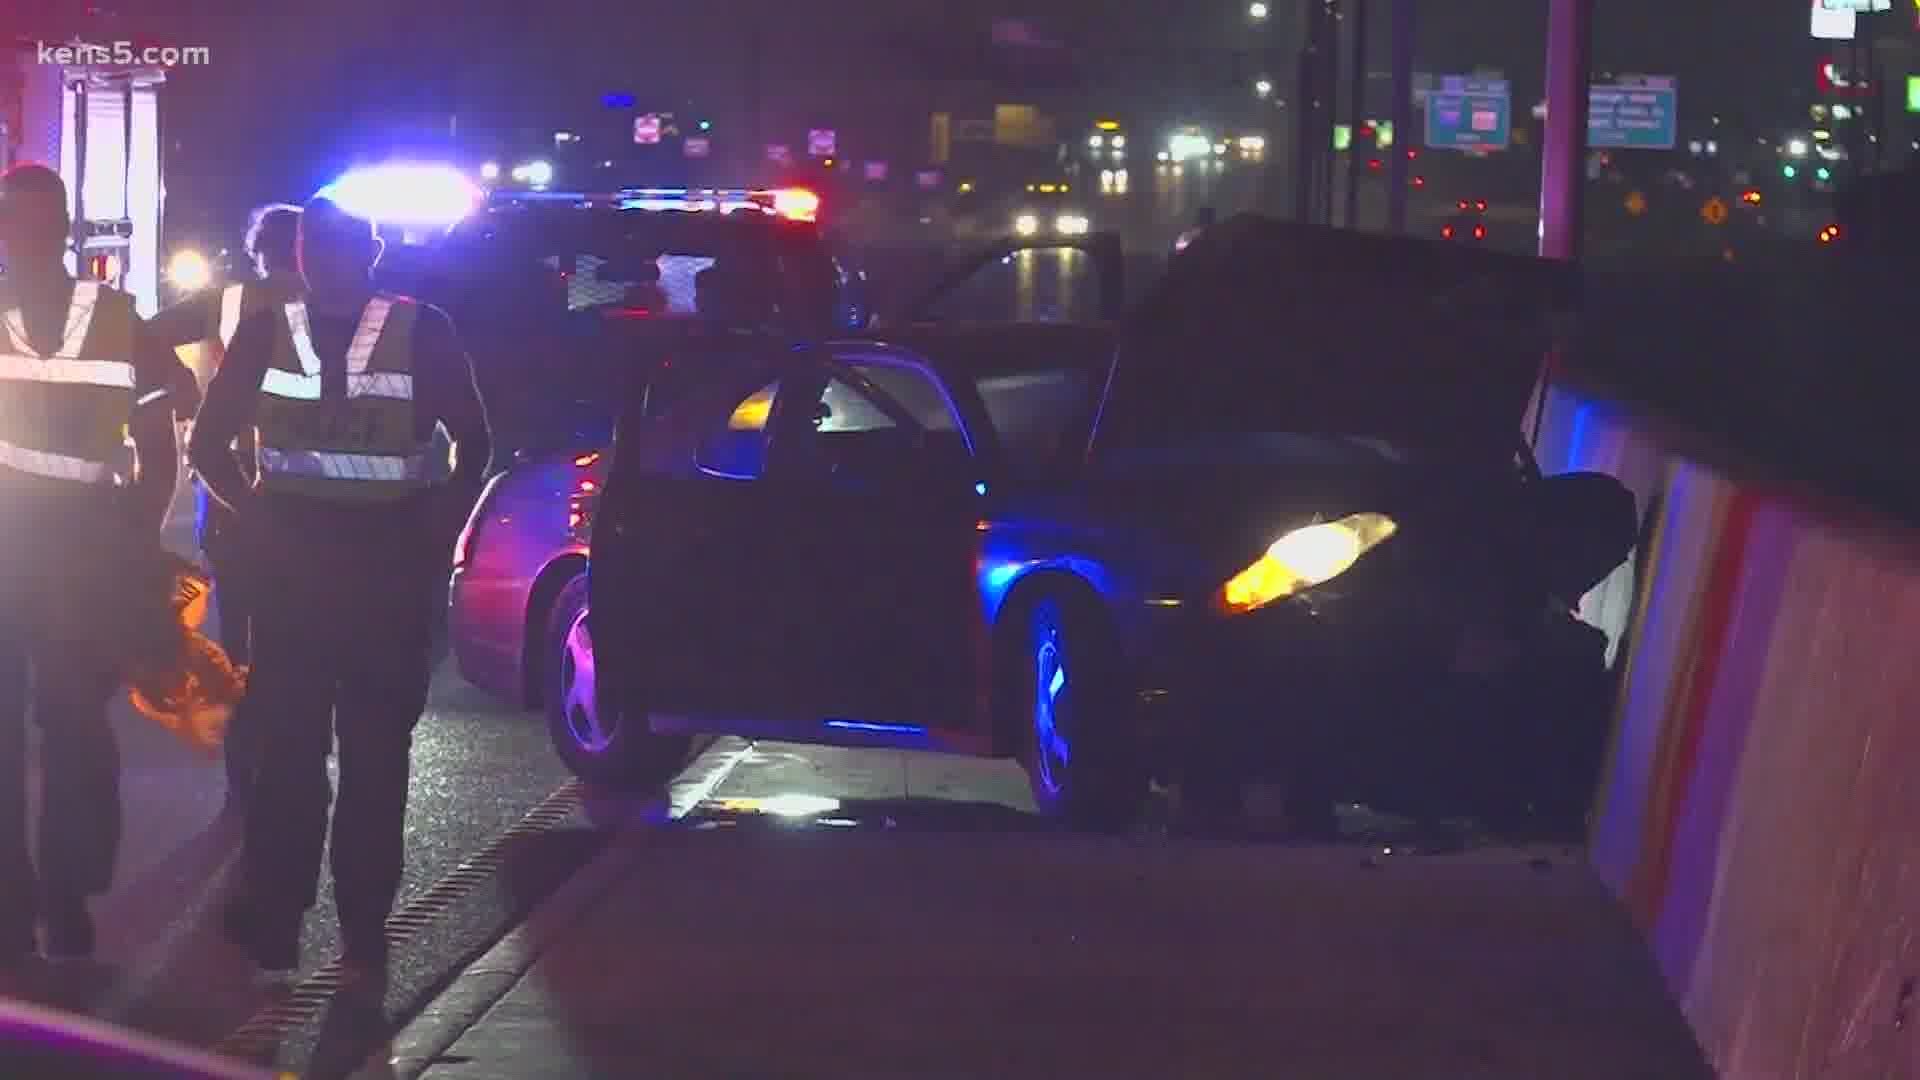 Officers found the victim's car crashed into the center median around 12:45 a.m.